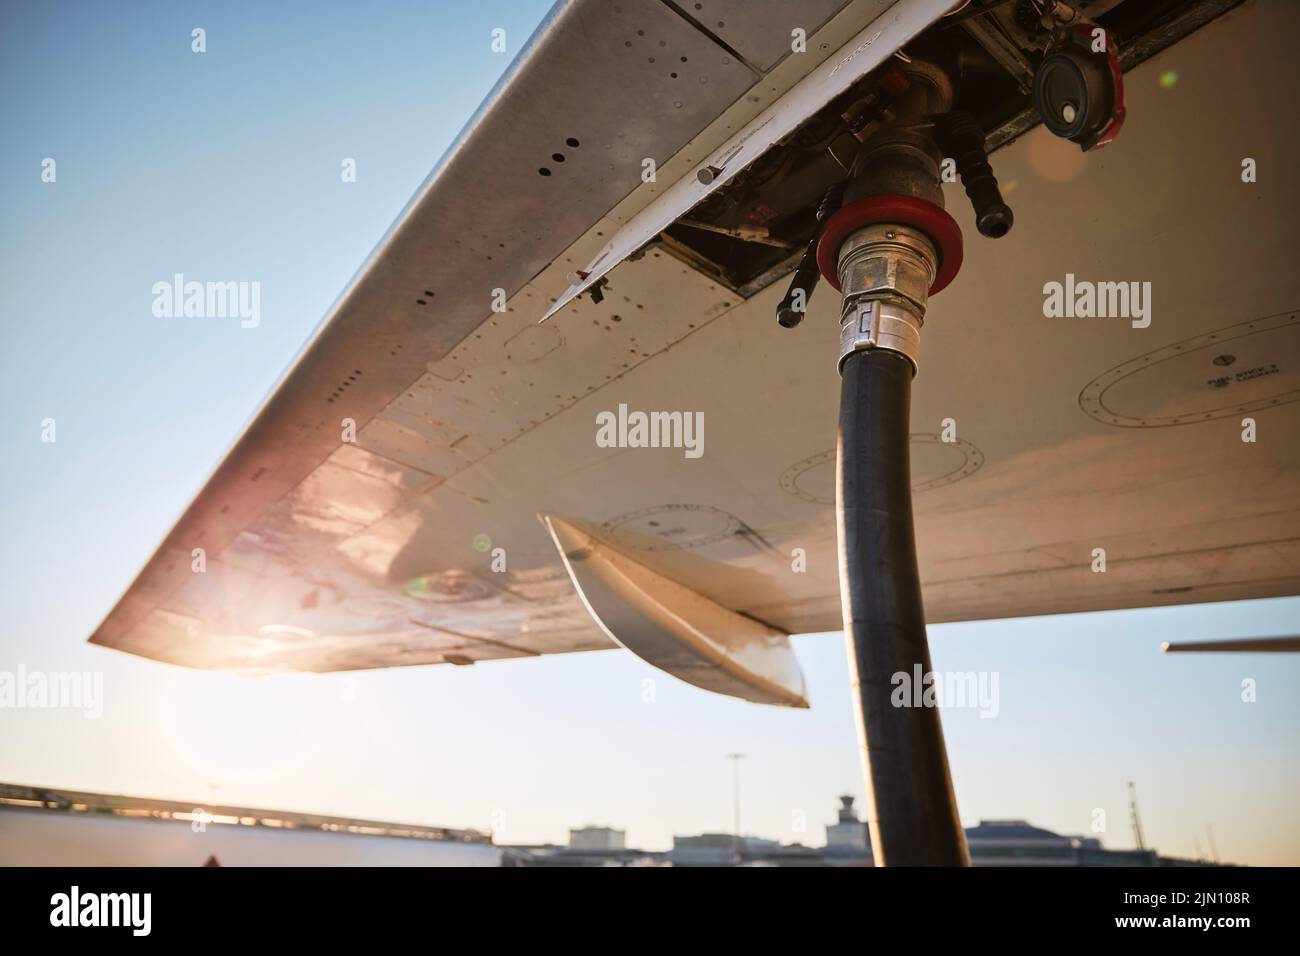 Refueling of airplane at airport. Ground service before flight. Stock Photo